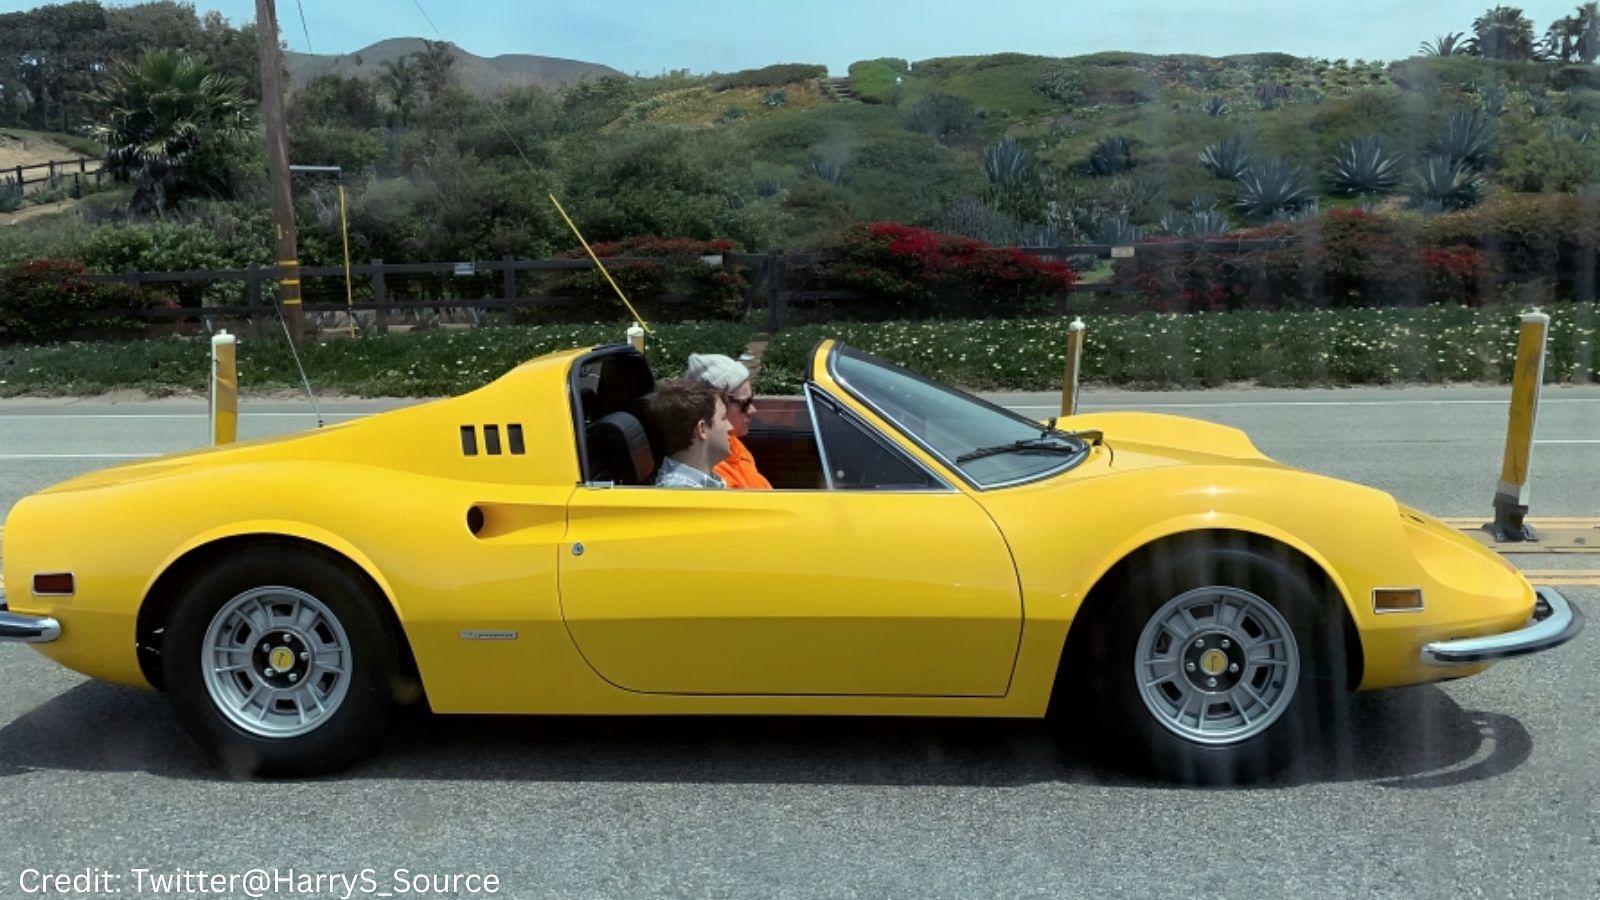 Harry Styles with a yellow 1972 Ferrari Dino 246 GT